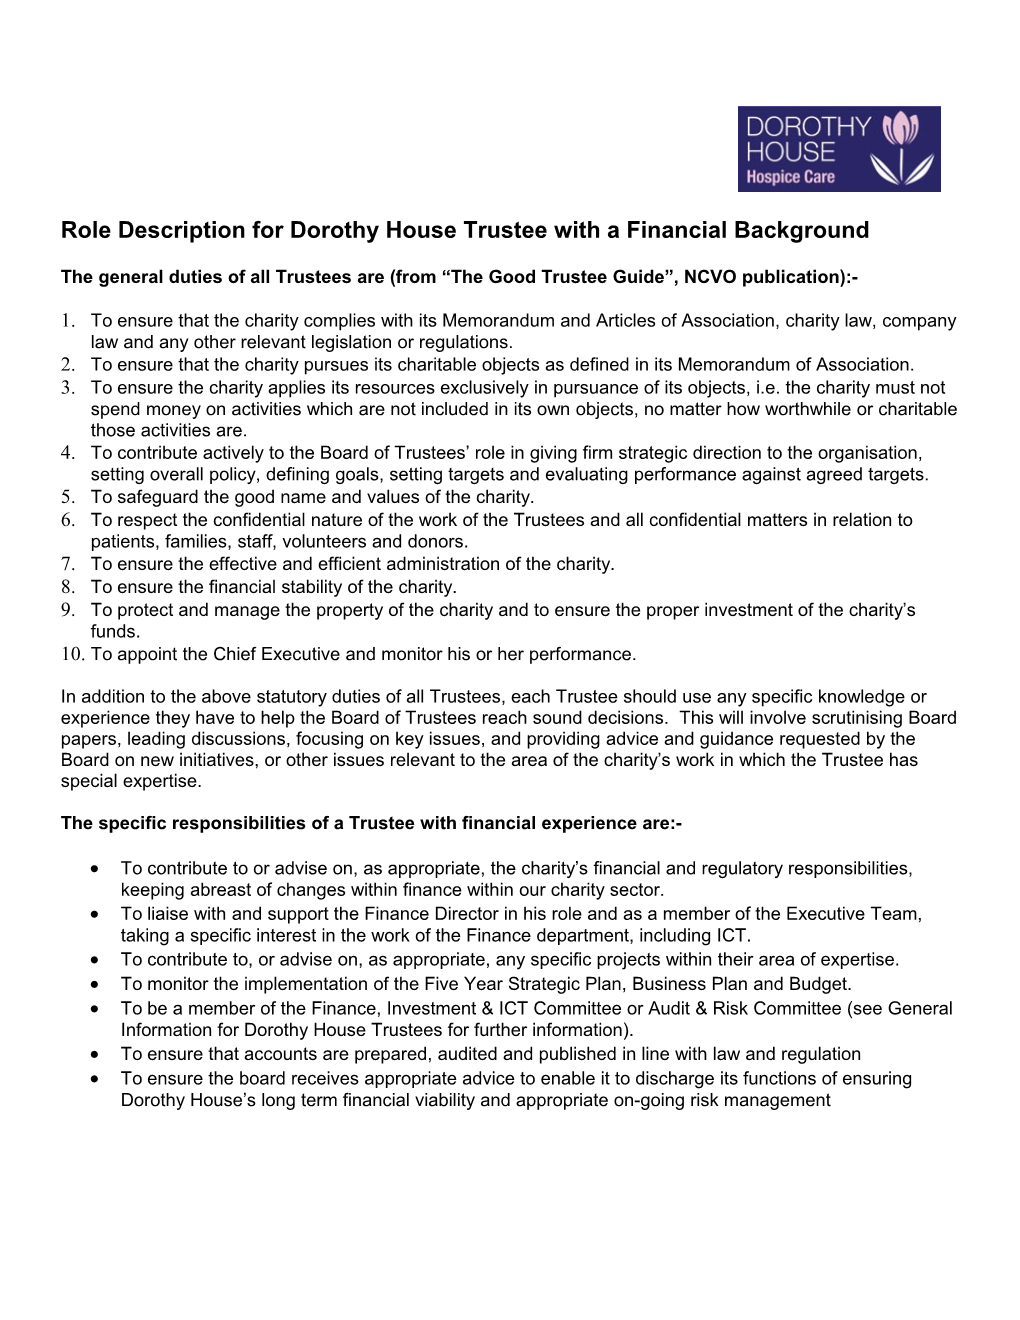 Role Description for Dorothy House Trustee with a Financial Background